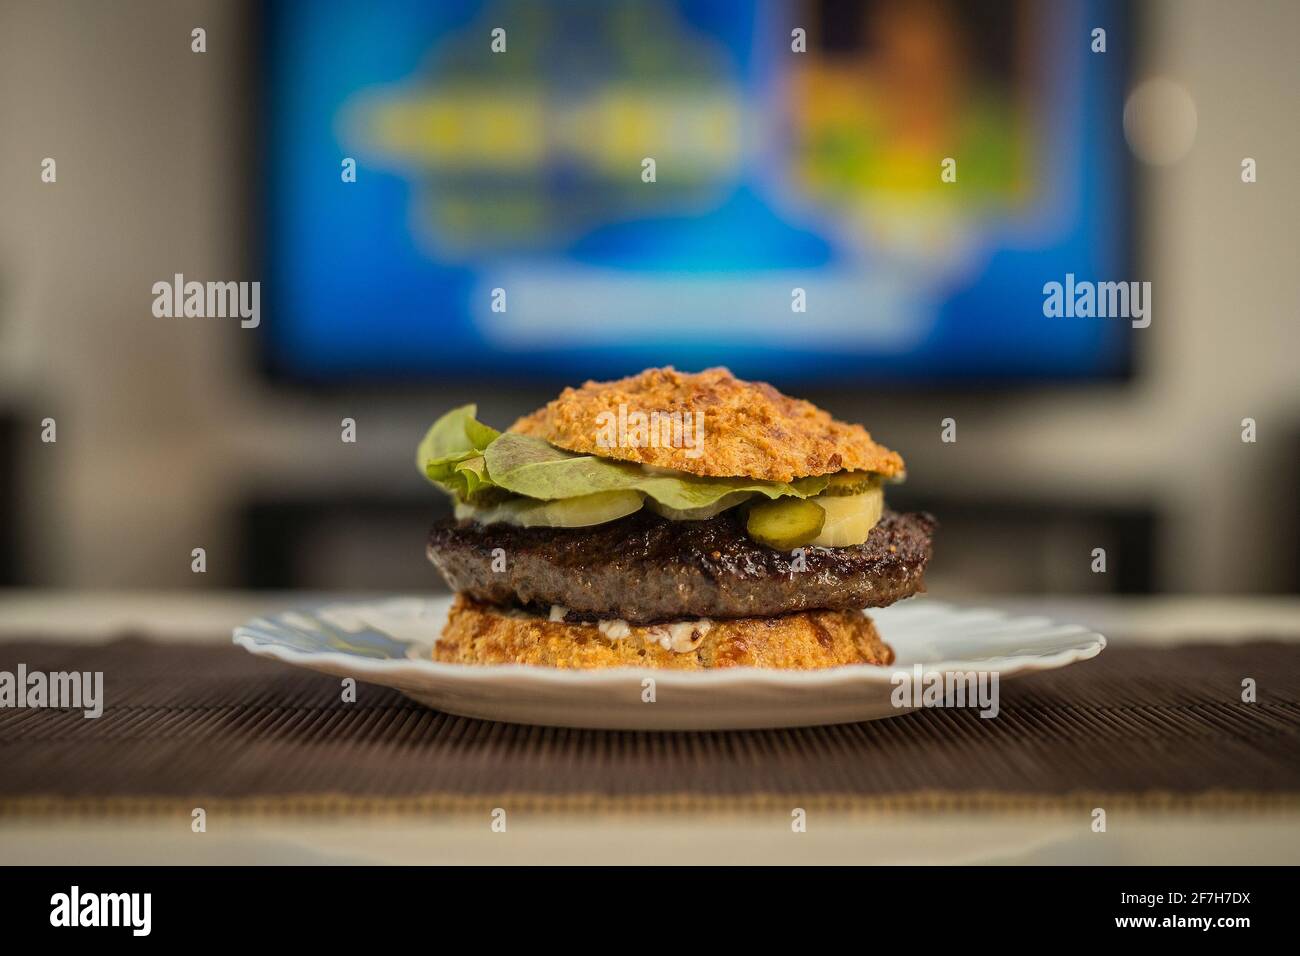 LCHF Low carbohydrate high fat burger or hamburger meal. LCHF burger with non carbohydrate bread made of sesame, eggs, chees, almonds. Concept picture Stock Photo